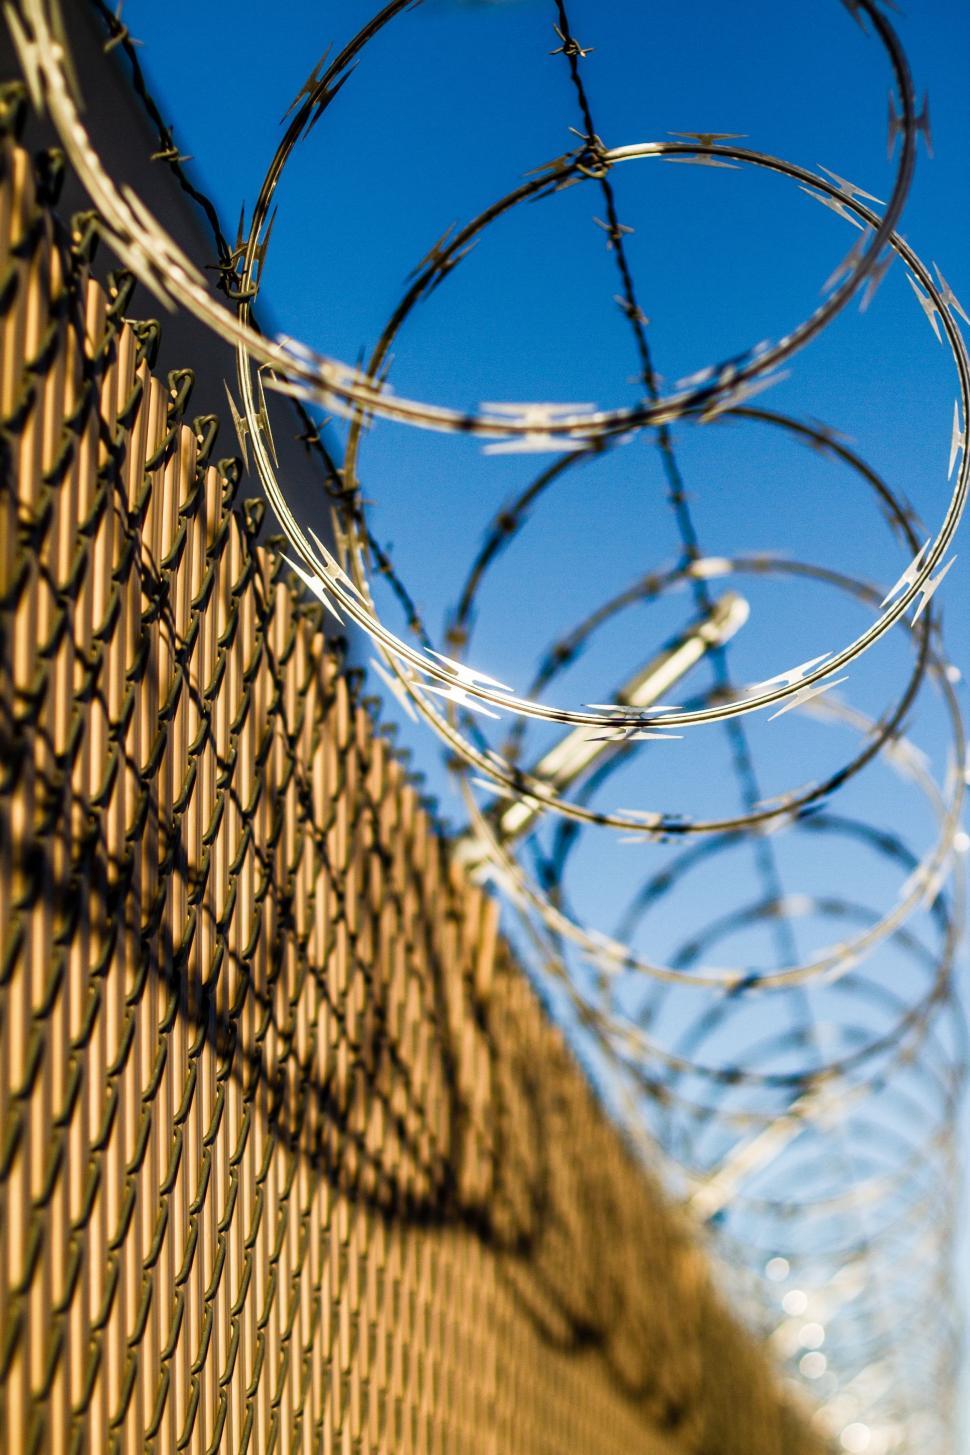 Free Image of Close Up of Fence With Barbed Wire 